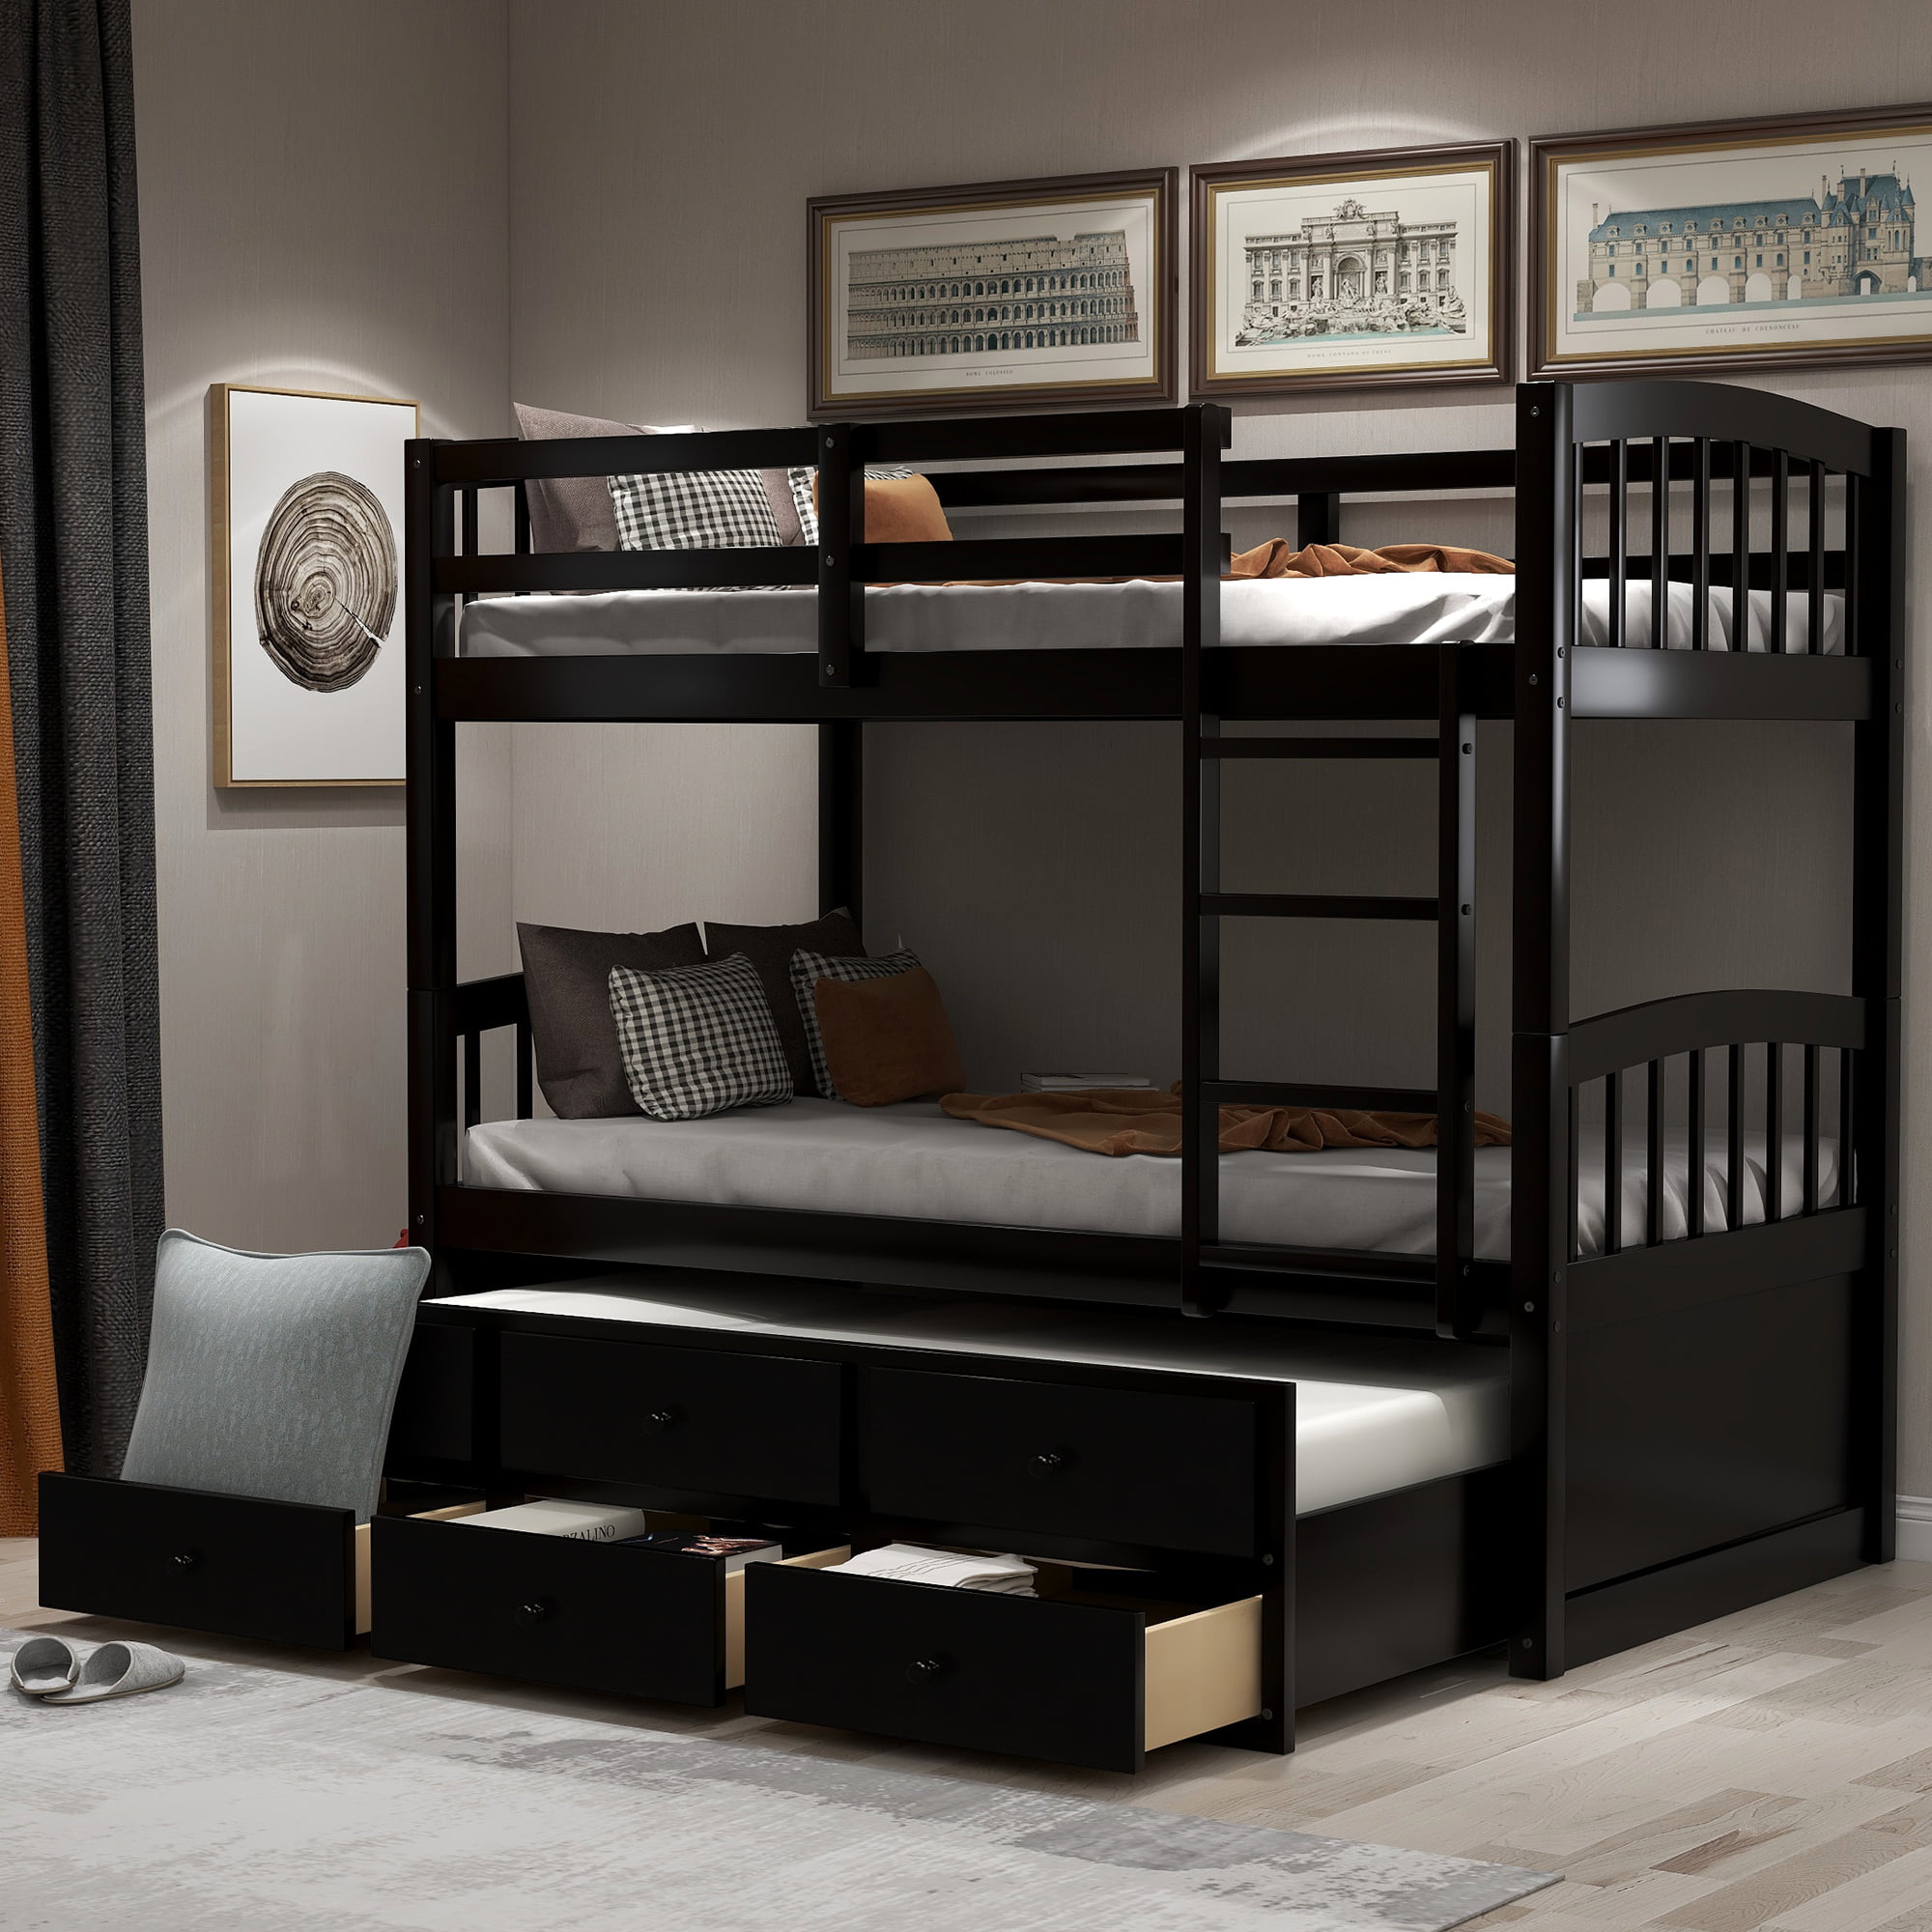 Twin Over Bunk Beds Solid Wood, Bunk Beds For Teens